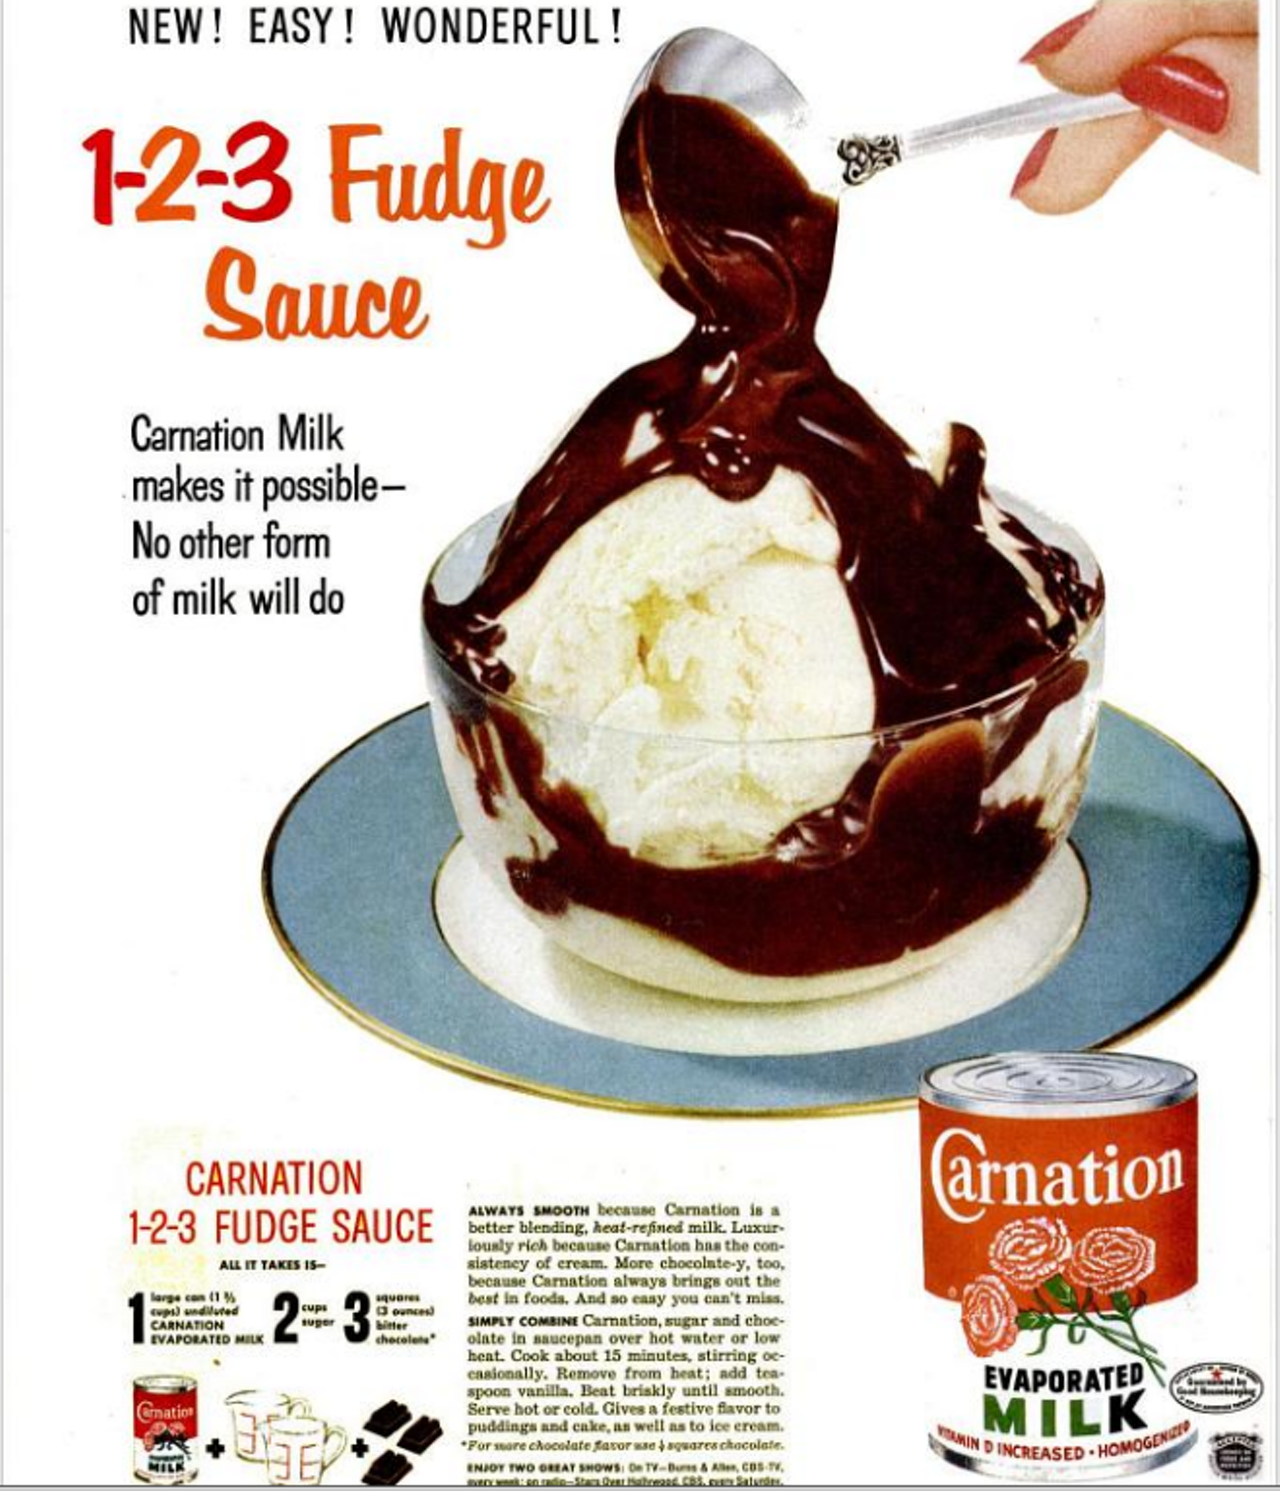 In 1953, Carnation shared a super-simple recipe for homemade hot fudge sauce ... that some of us may still be using today. via Dying For Chocolate